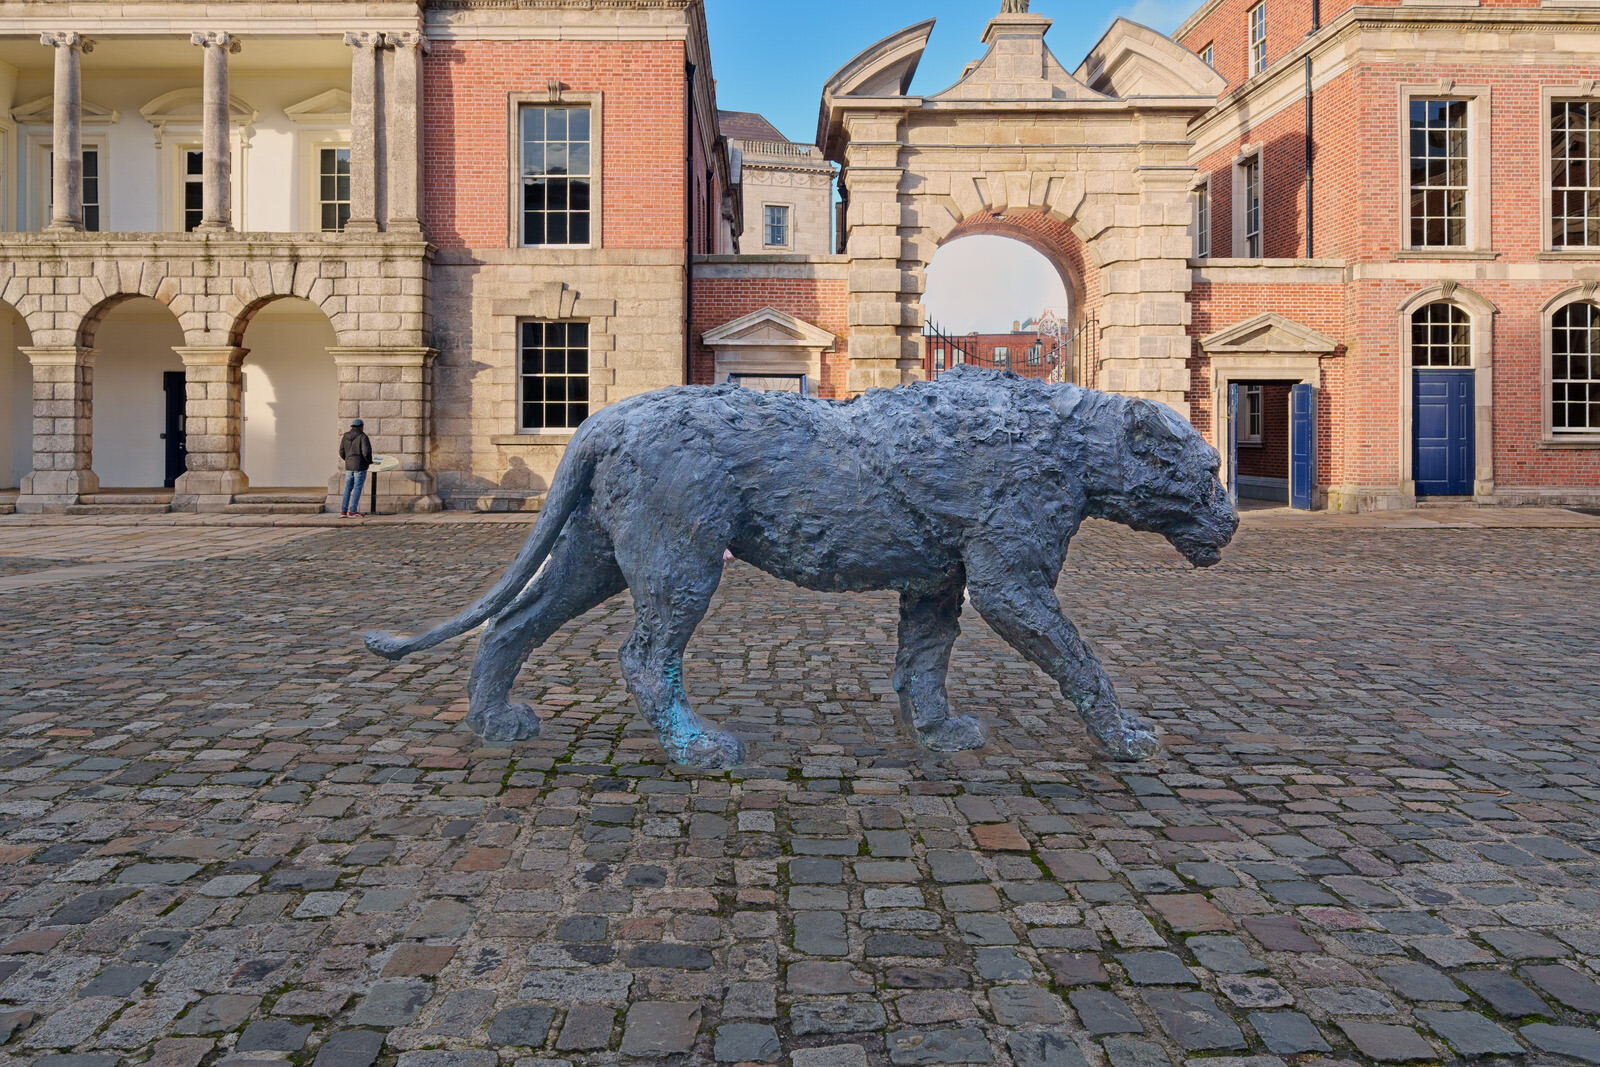 APPARENTLY THIS BRONZE LIONESS HAS BEEN HERE FOR MONTHS [SCULPTURE BY DAVIDE RIVALTA]-224948-1